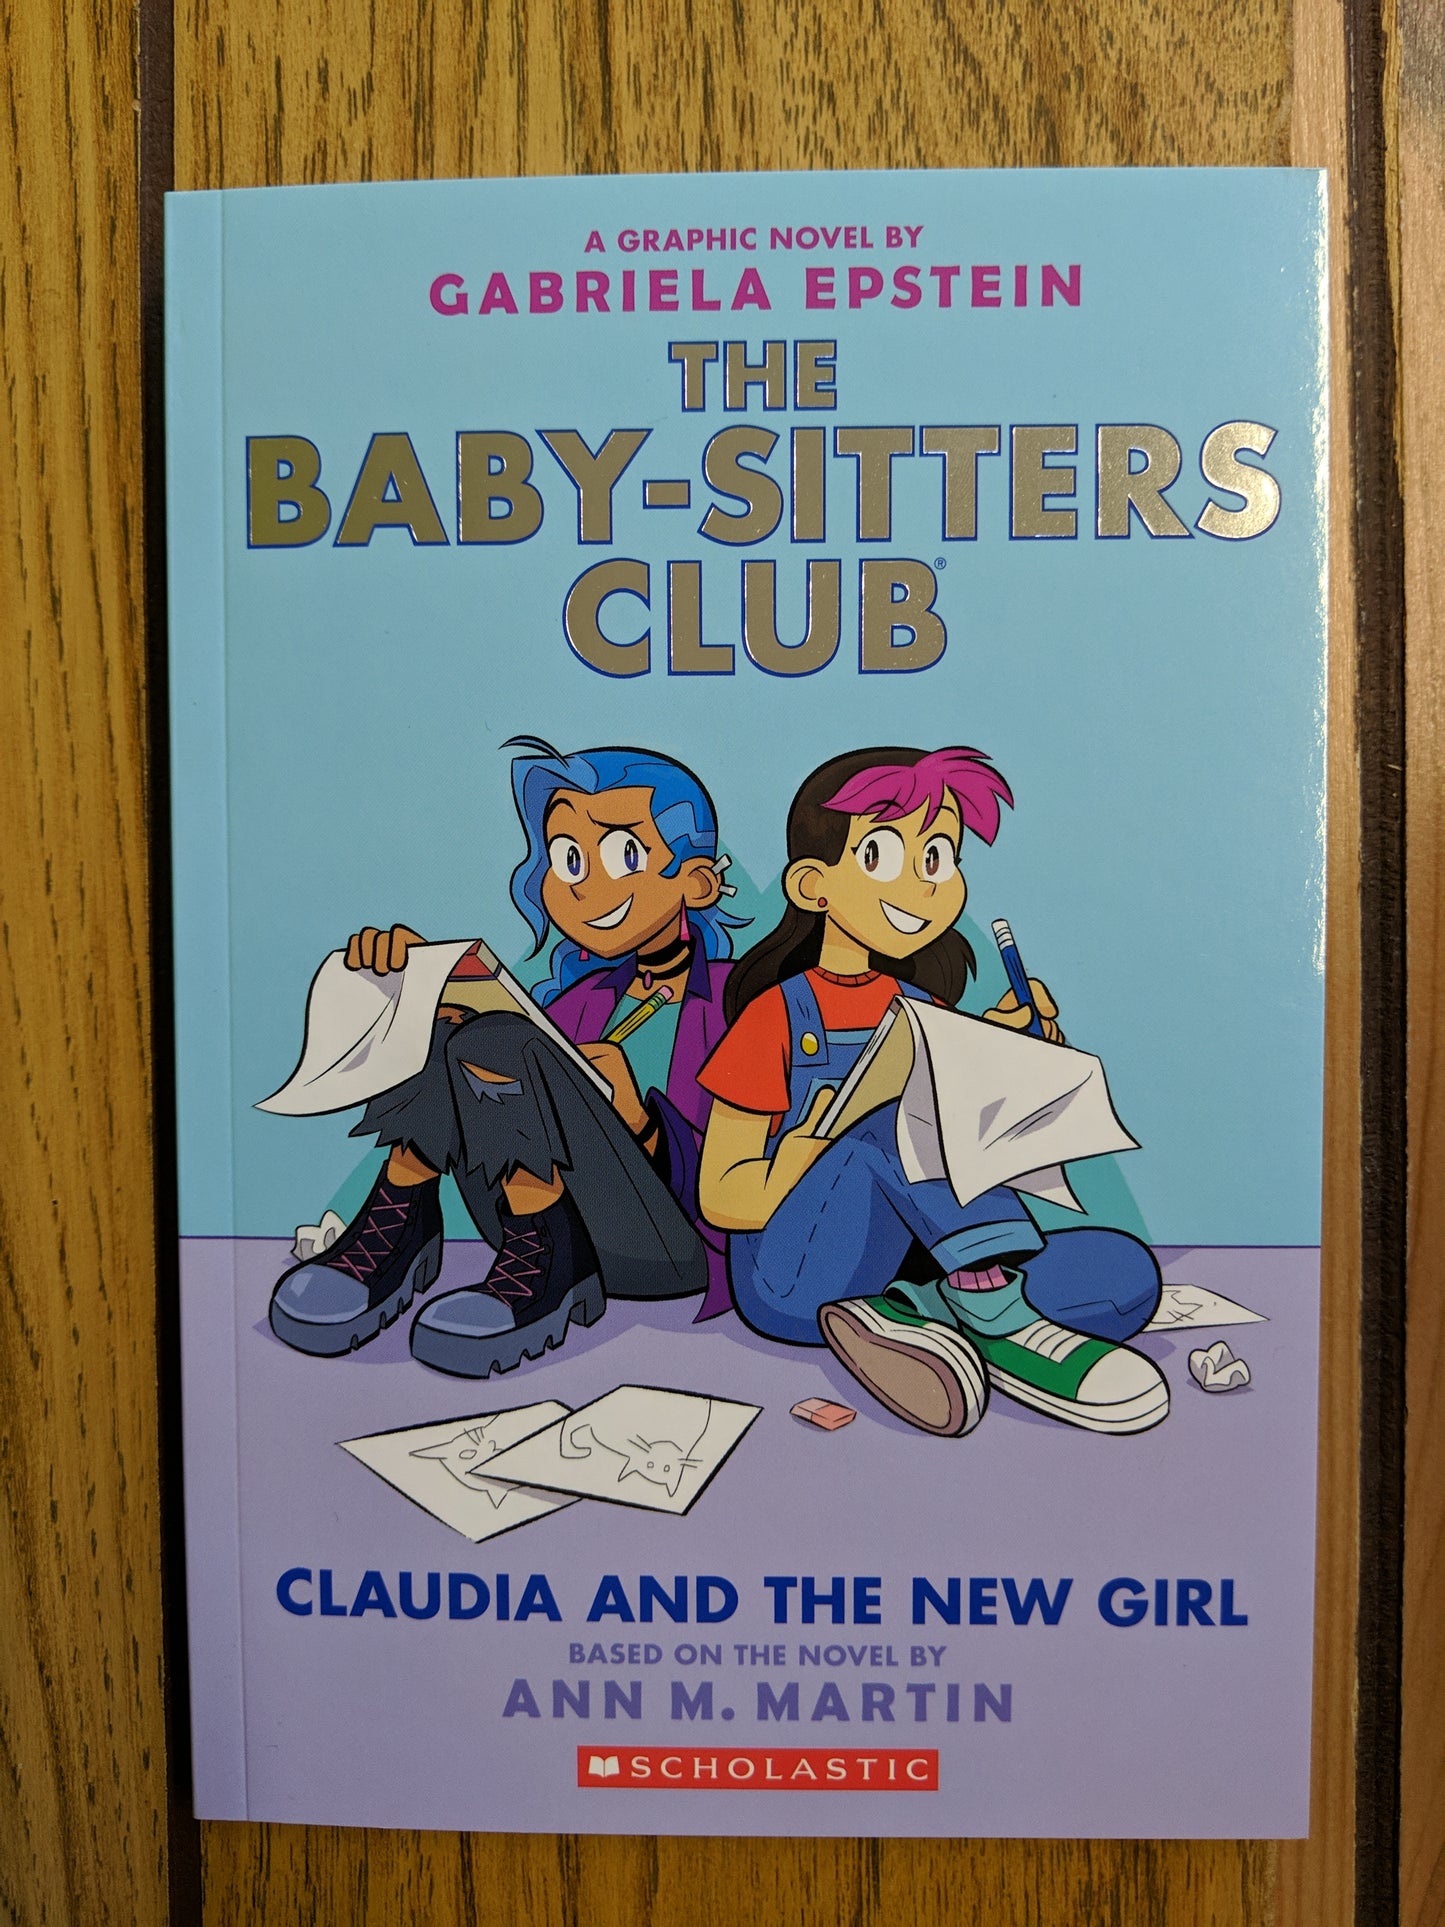 The Baby-Sitters Club: Claudia and the New Girl (#9)